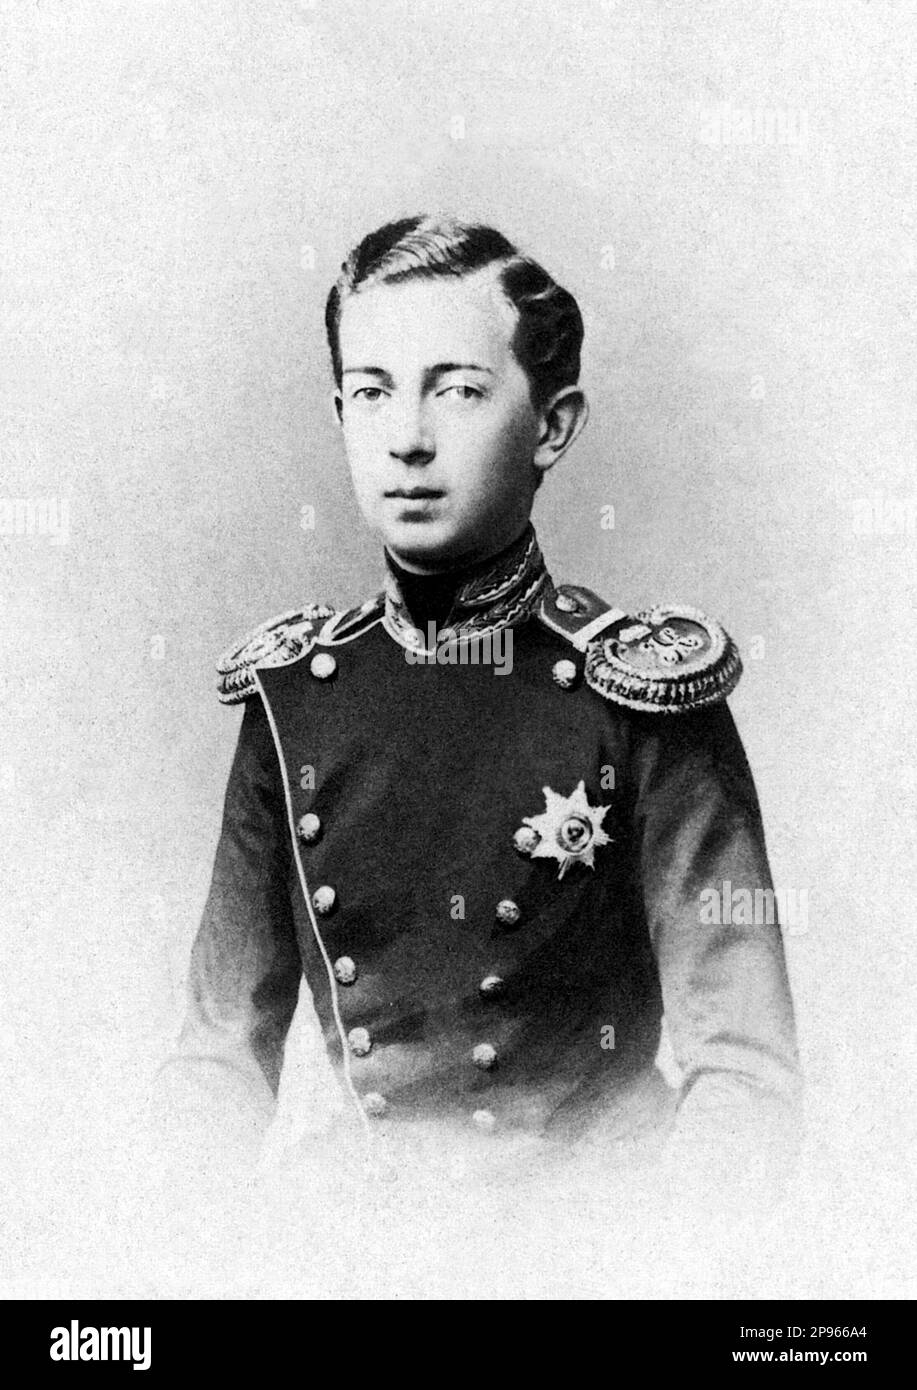 1878 c, RUSSIA : The russian Tsar Nicholas II of Russia (  1868– 1918) ( Nikolay II ) was the last Emperor of Russia, King of Poland and Grand Duke of Finland . He ruled from 1894 until his forced abdication in 1917 .  His rule ended with the Russian Revolution of 1917, after which he and his family were executed by Bolsheviks .  Subsequent to his canonization, he has been regarded as Saint Nicholas The Passion Bearer by the Russian Orthodox Church . - foto storiche - foto storica  - portrait - ritratto -  Nobiltà  - nobility - nobili  - nobile - BELLE EPOQUE  - RUSSIA - ZAR - Czar - TZAR - RU Stock Photo